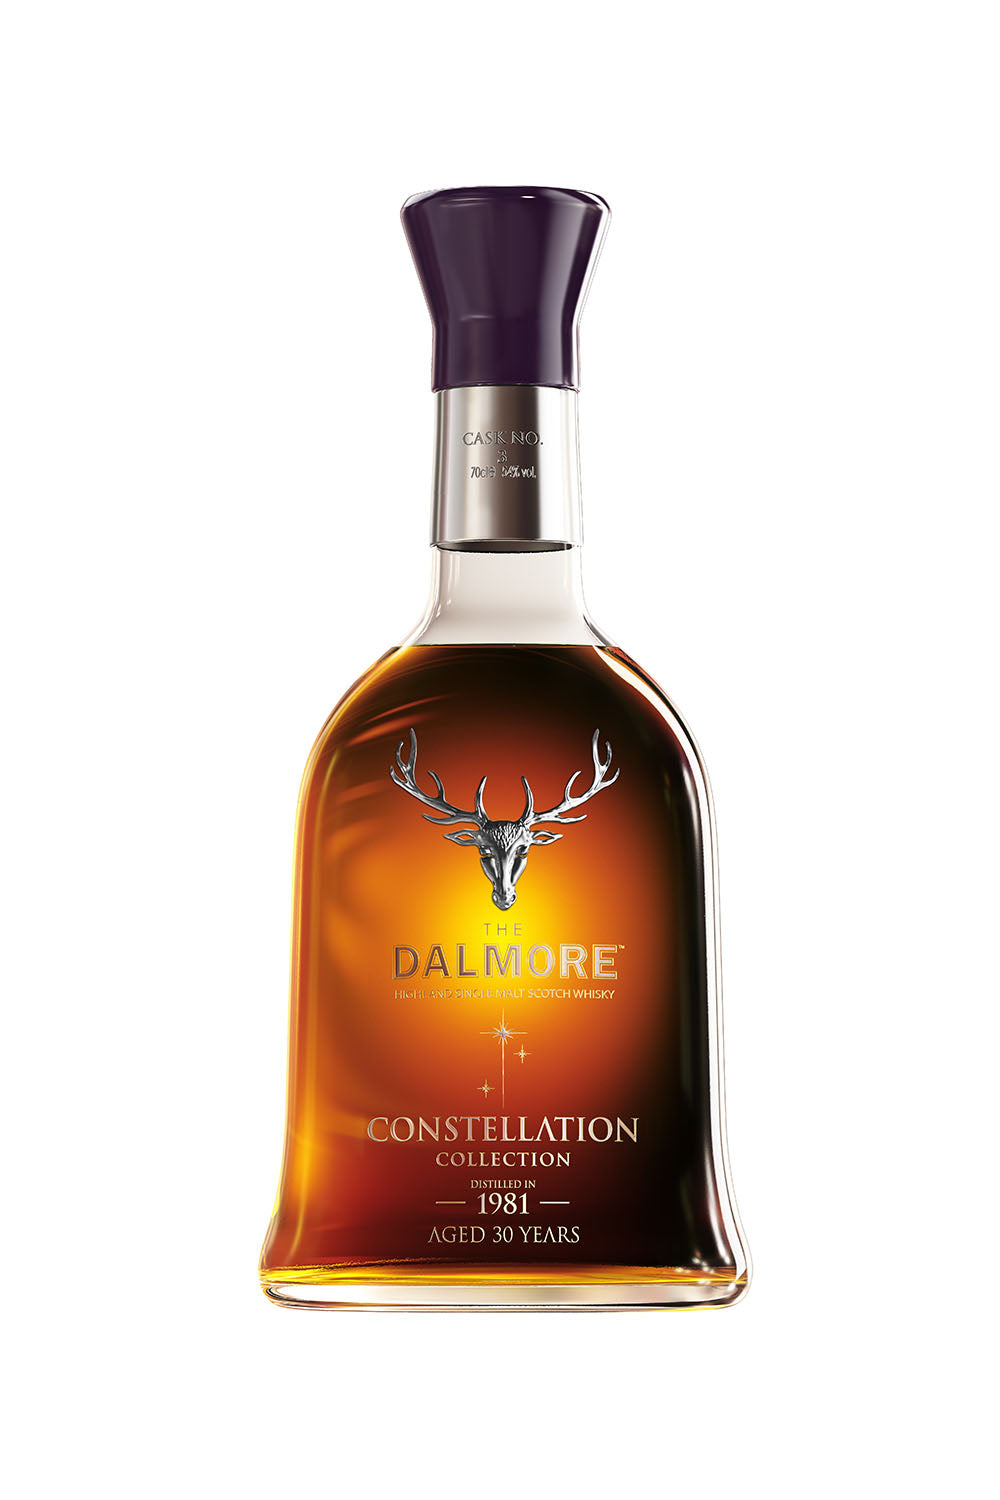 The Dalmore 1981 Constellation - Cask 3